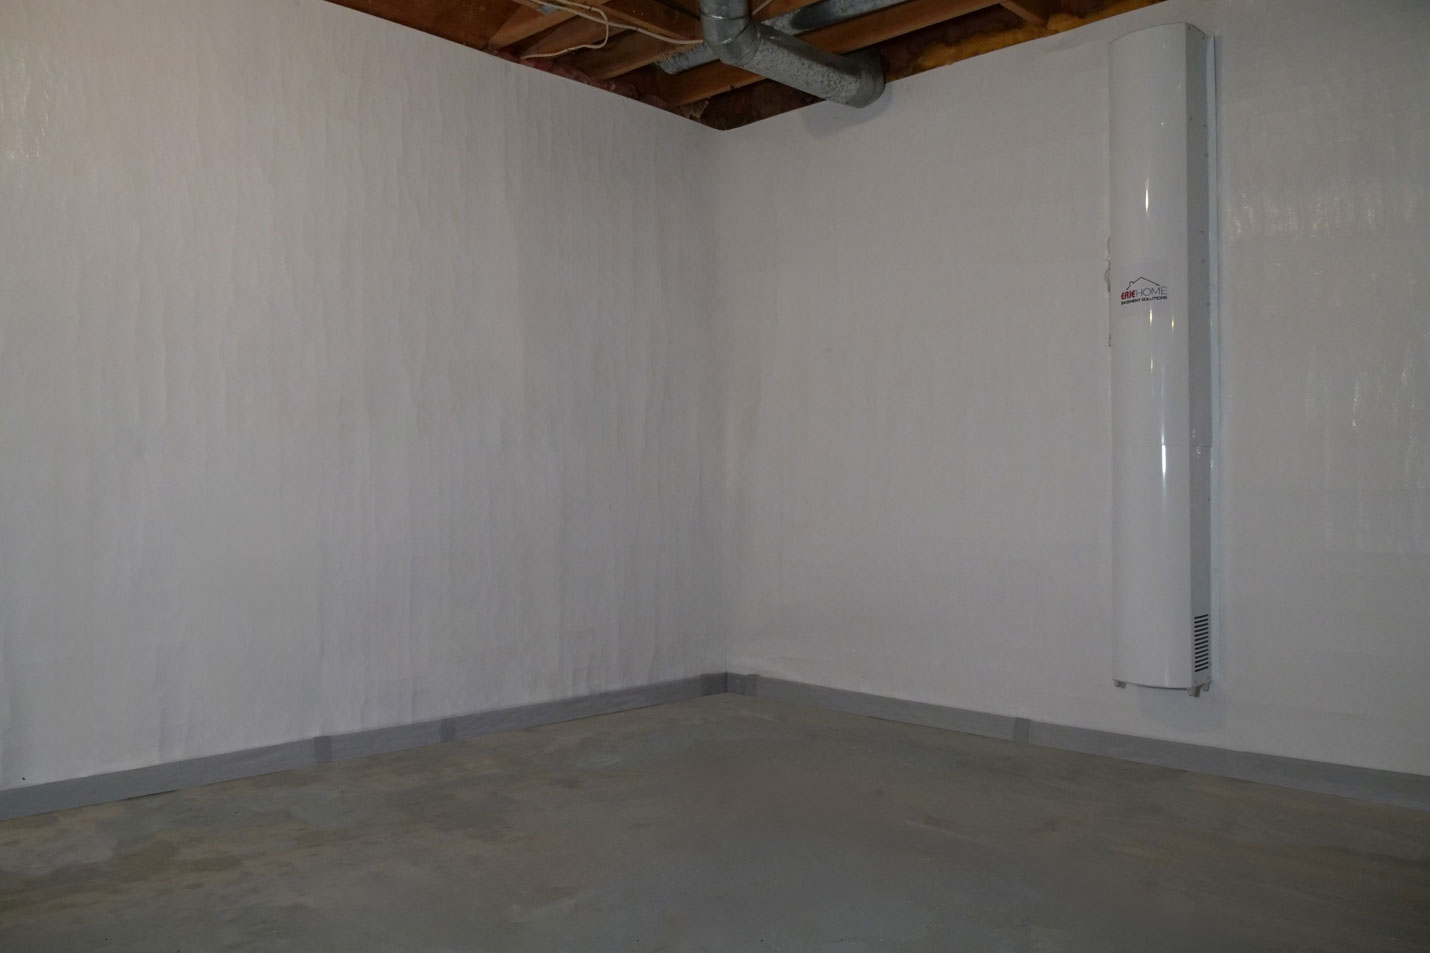 A completed Erie Home waterproofed basement with the clean white encapsulated walls and the air purification system hanging from the wall.